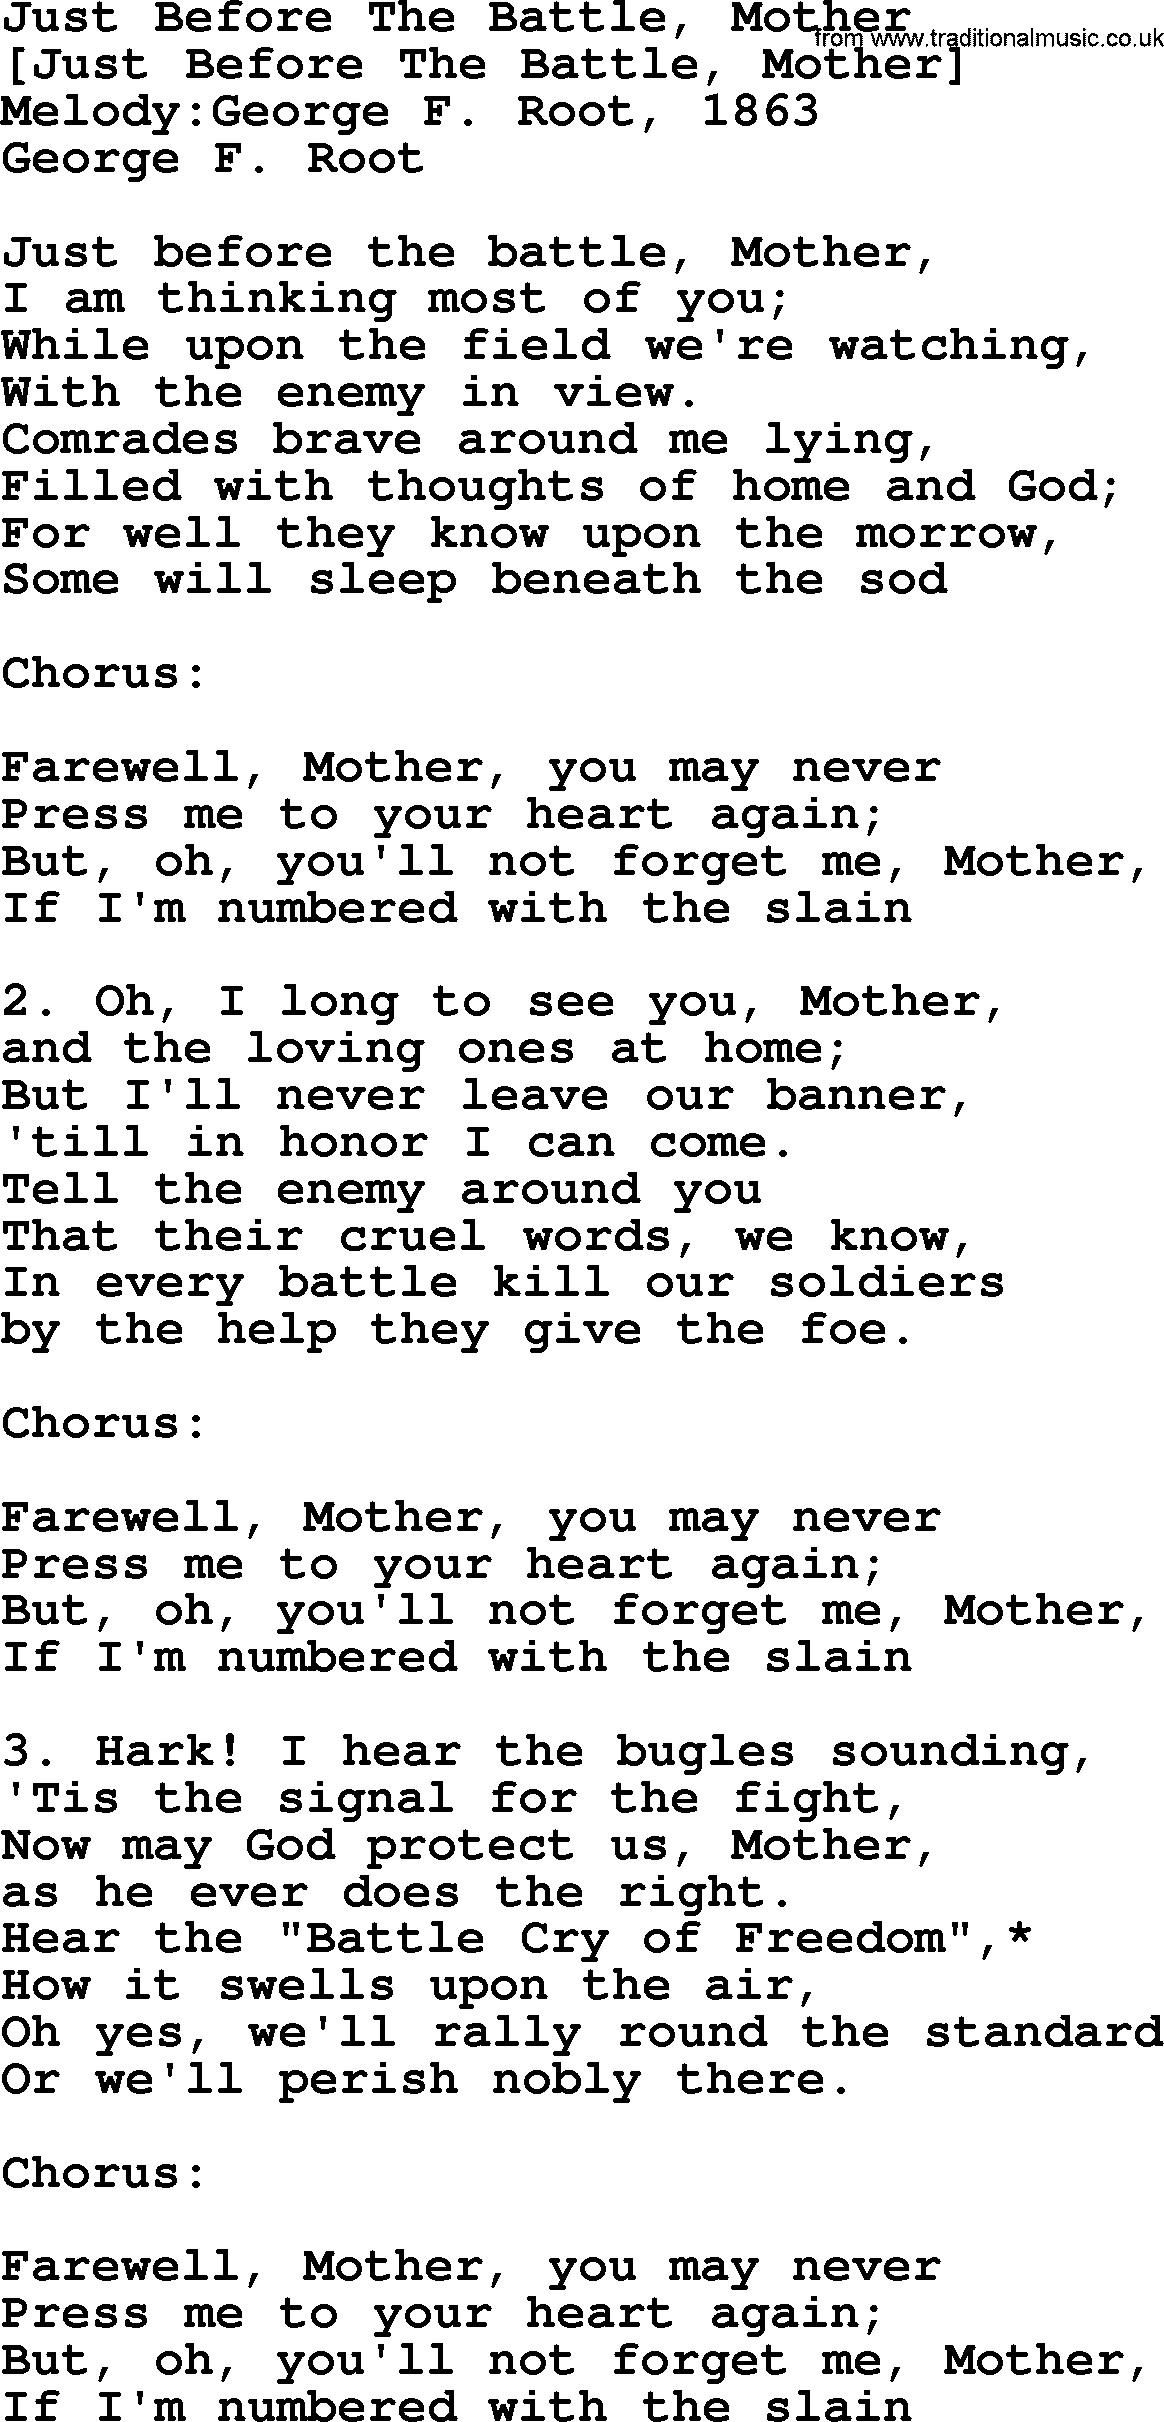 Old American Song: Just Before The Battle, Mother, lyrics